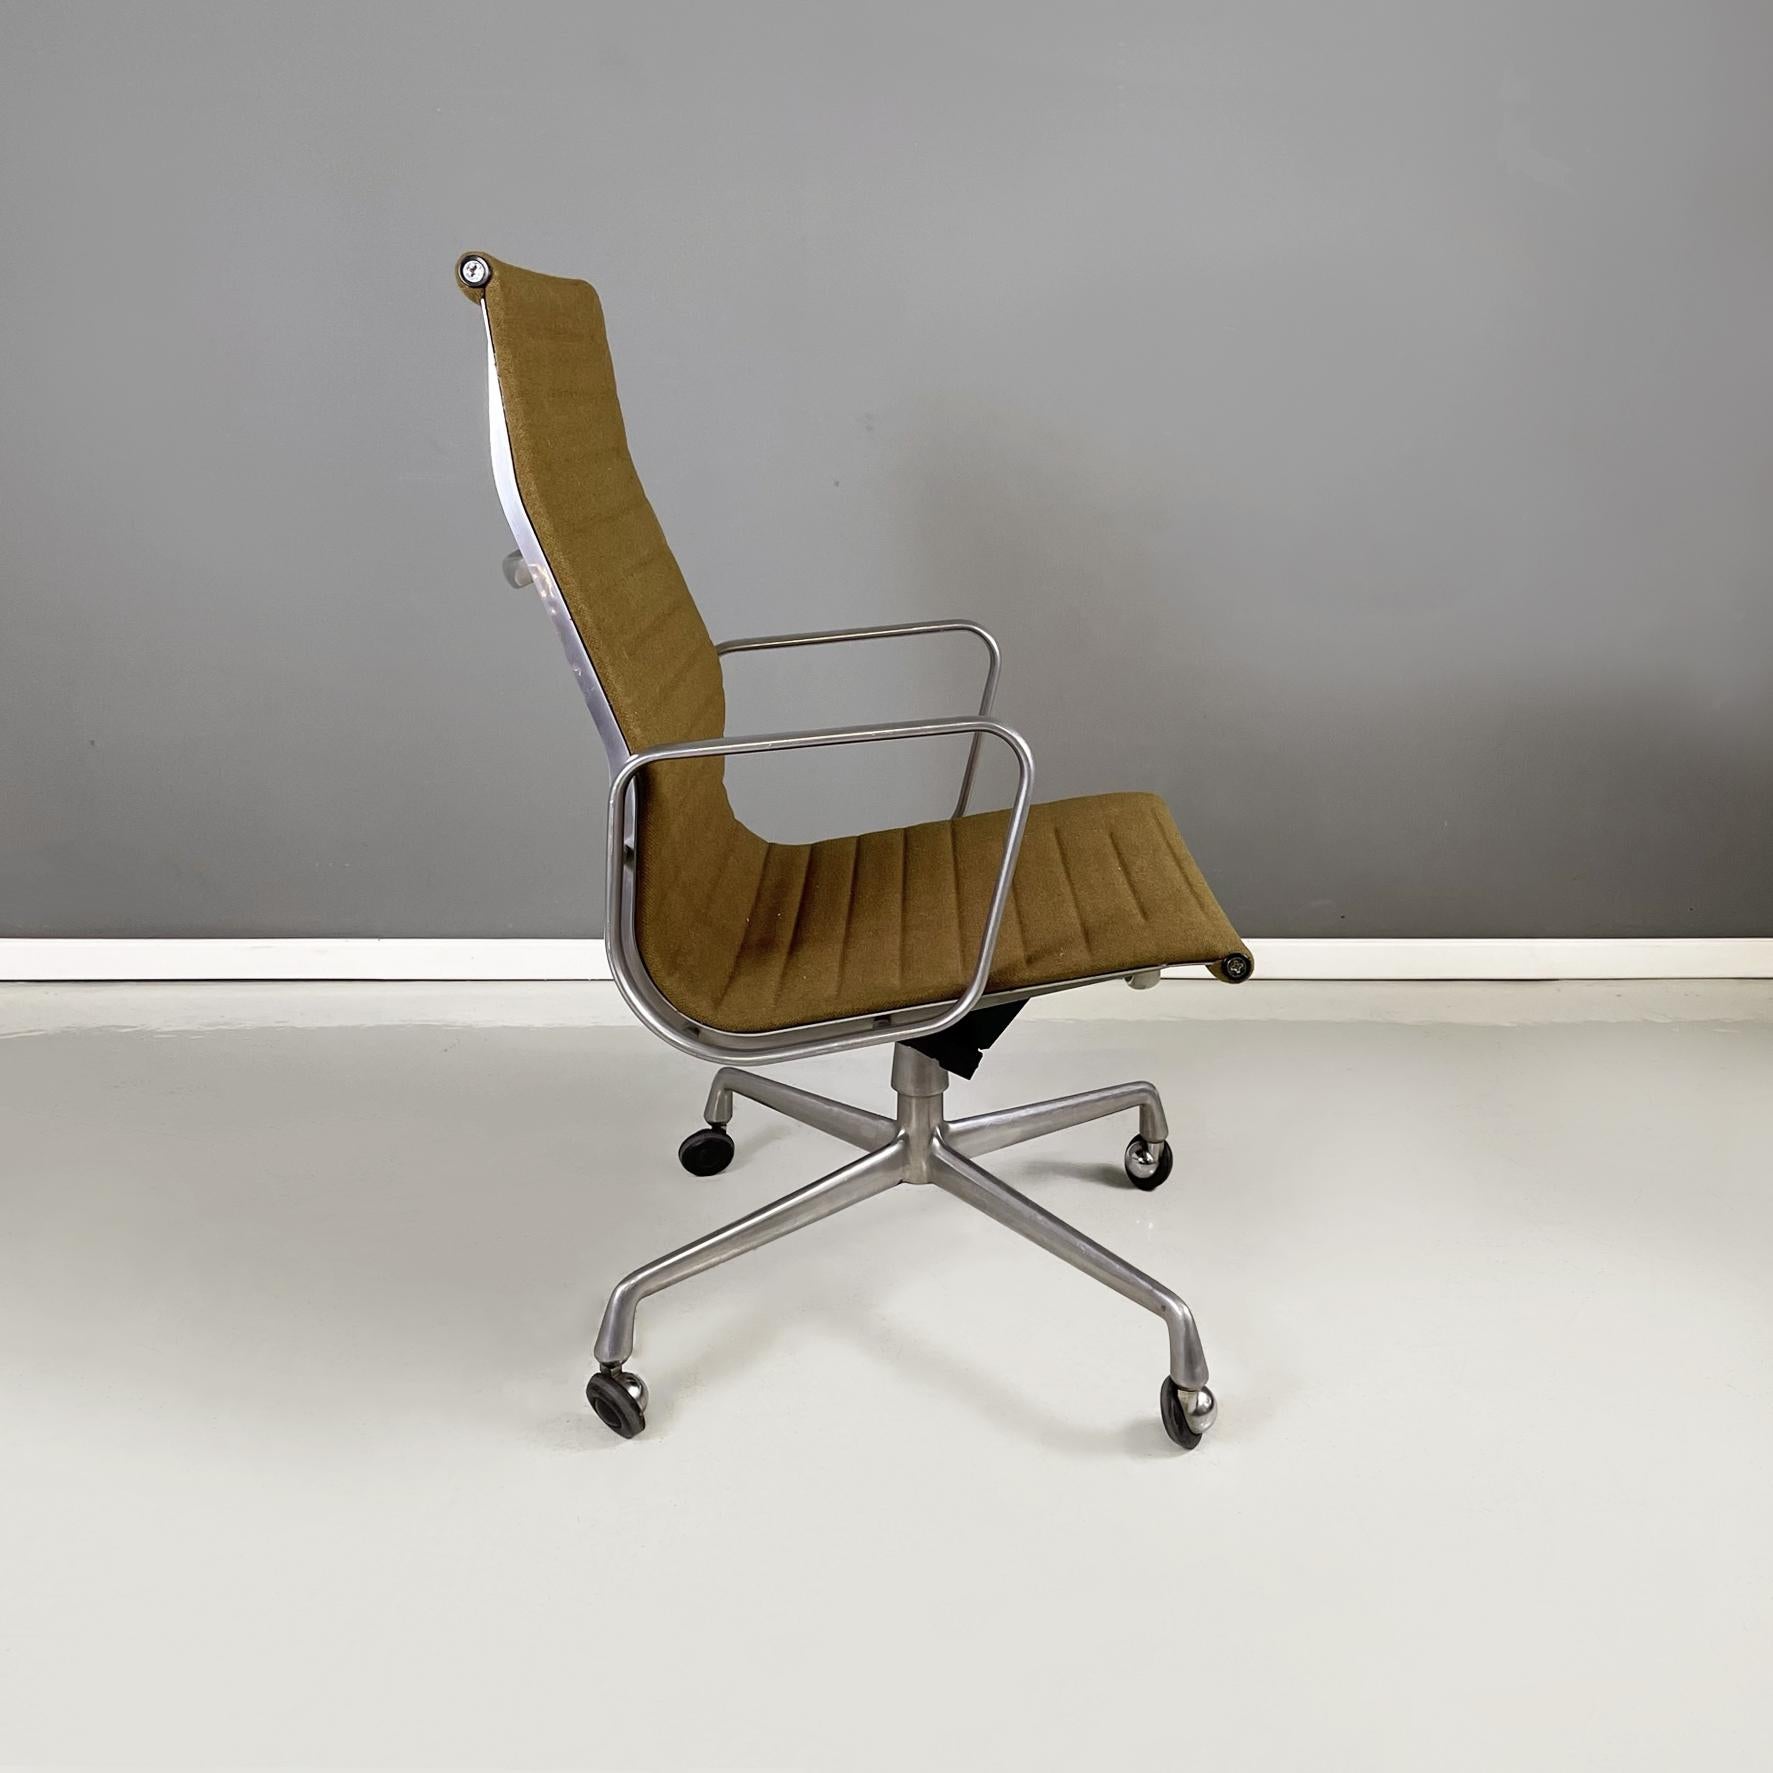 duo chair icf